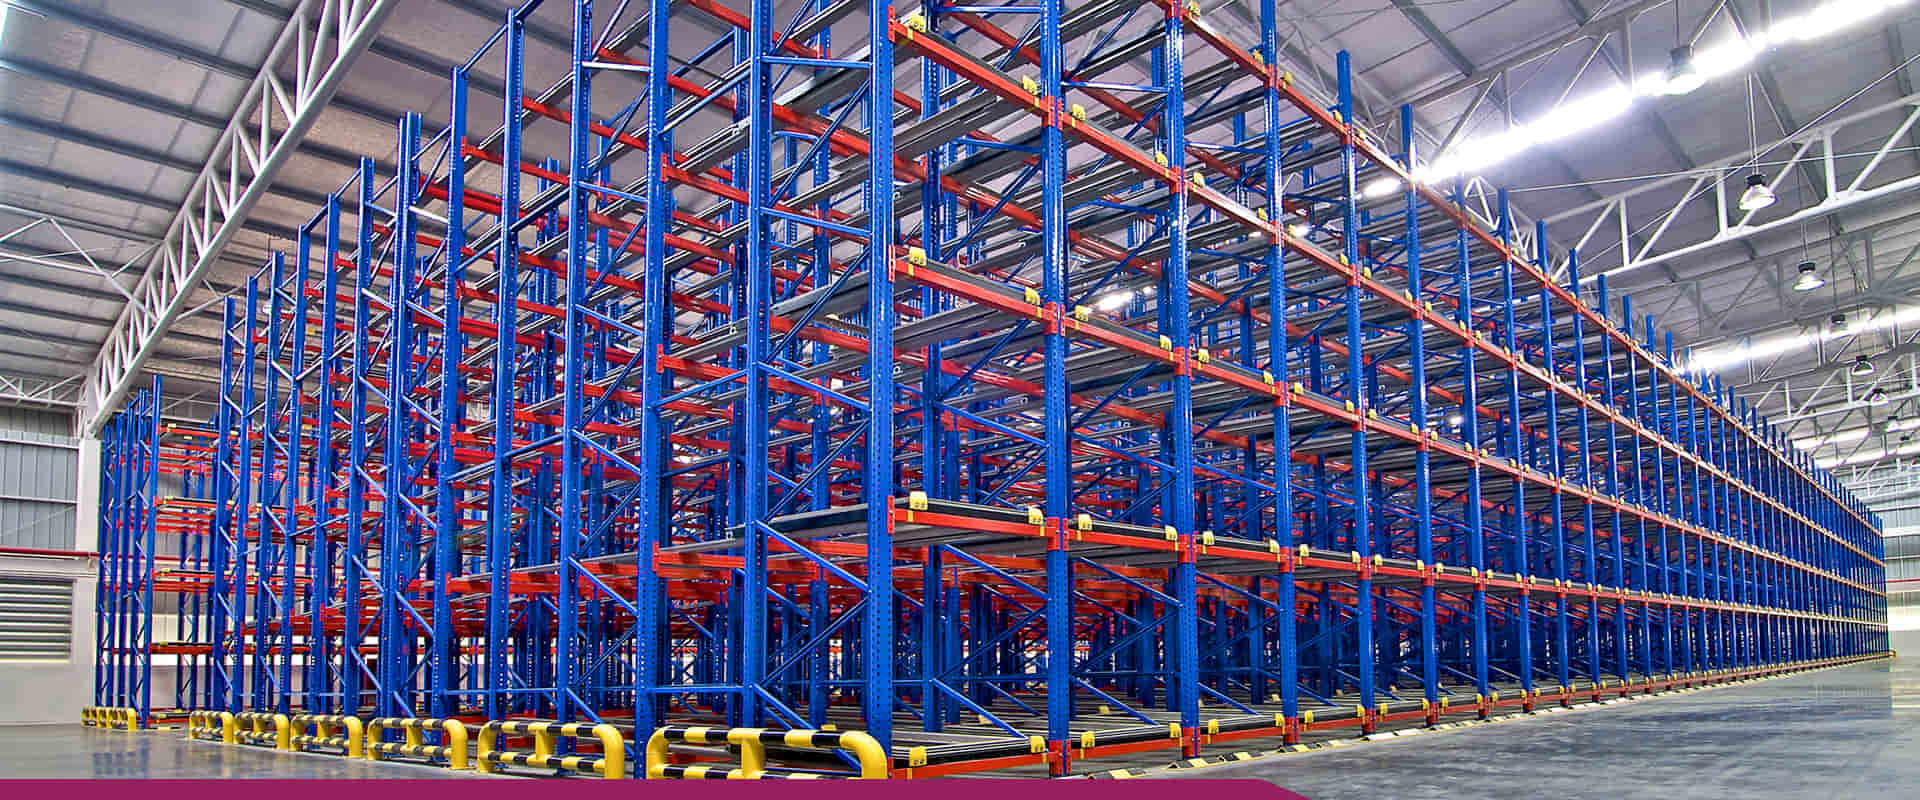 India’s Top Warehouse And Industrial Storage Racks Manufacturer